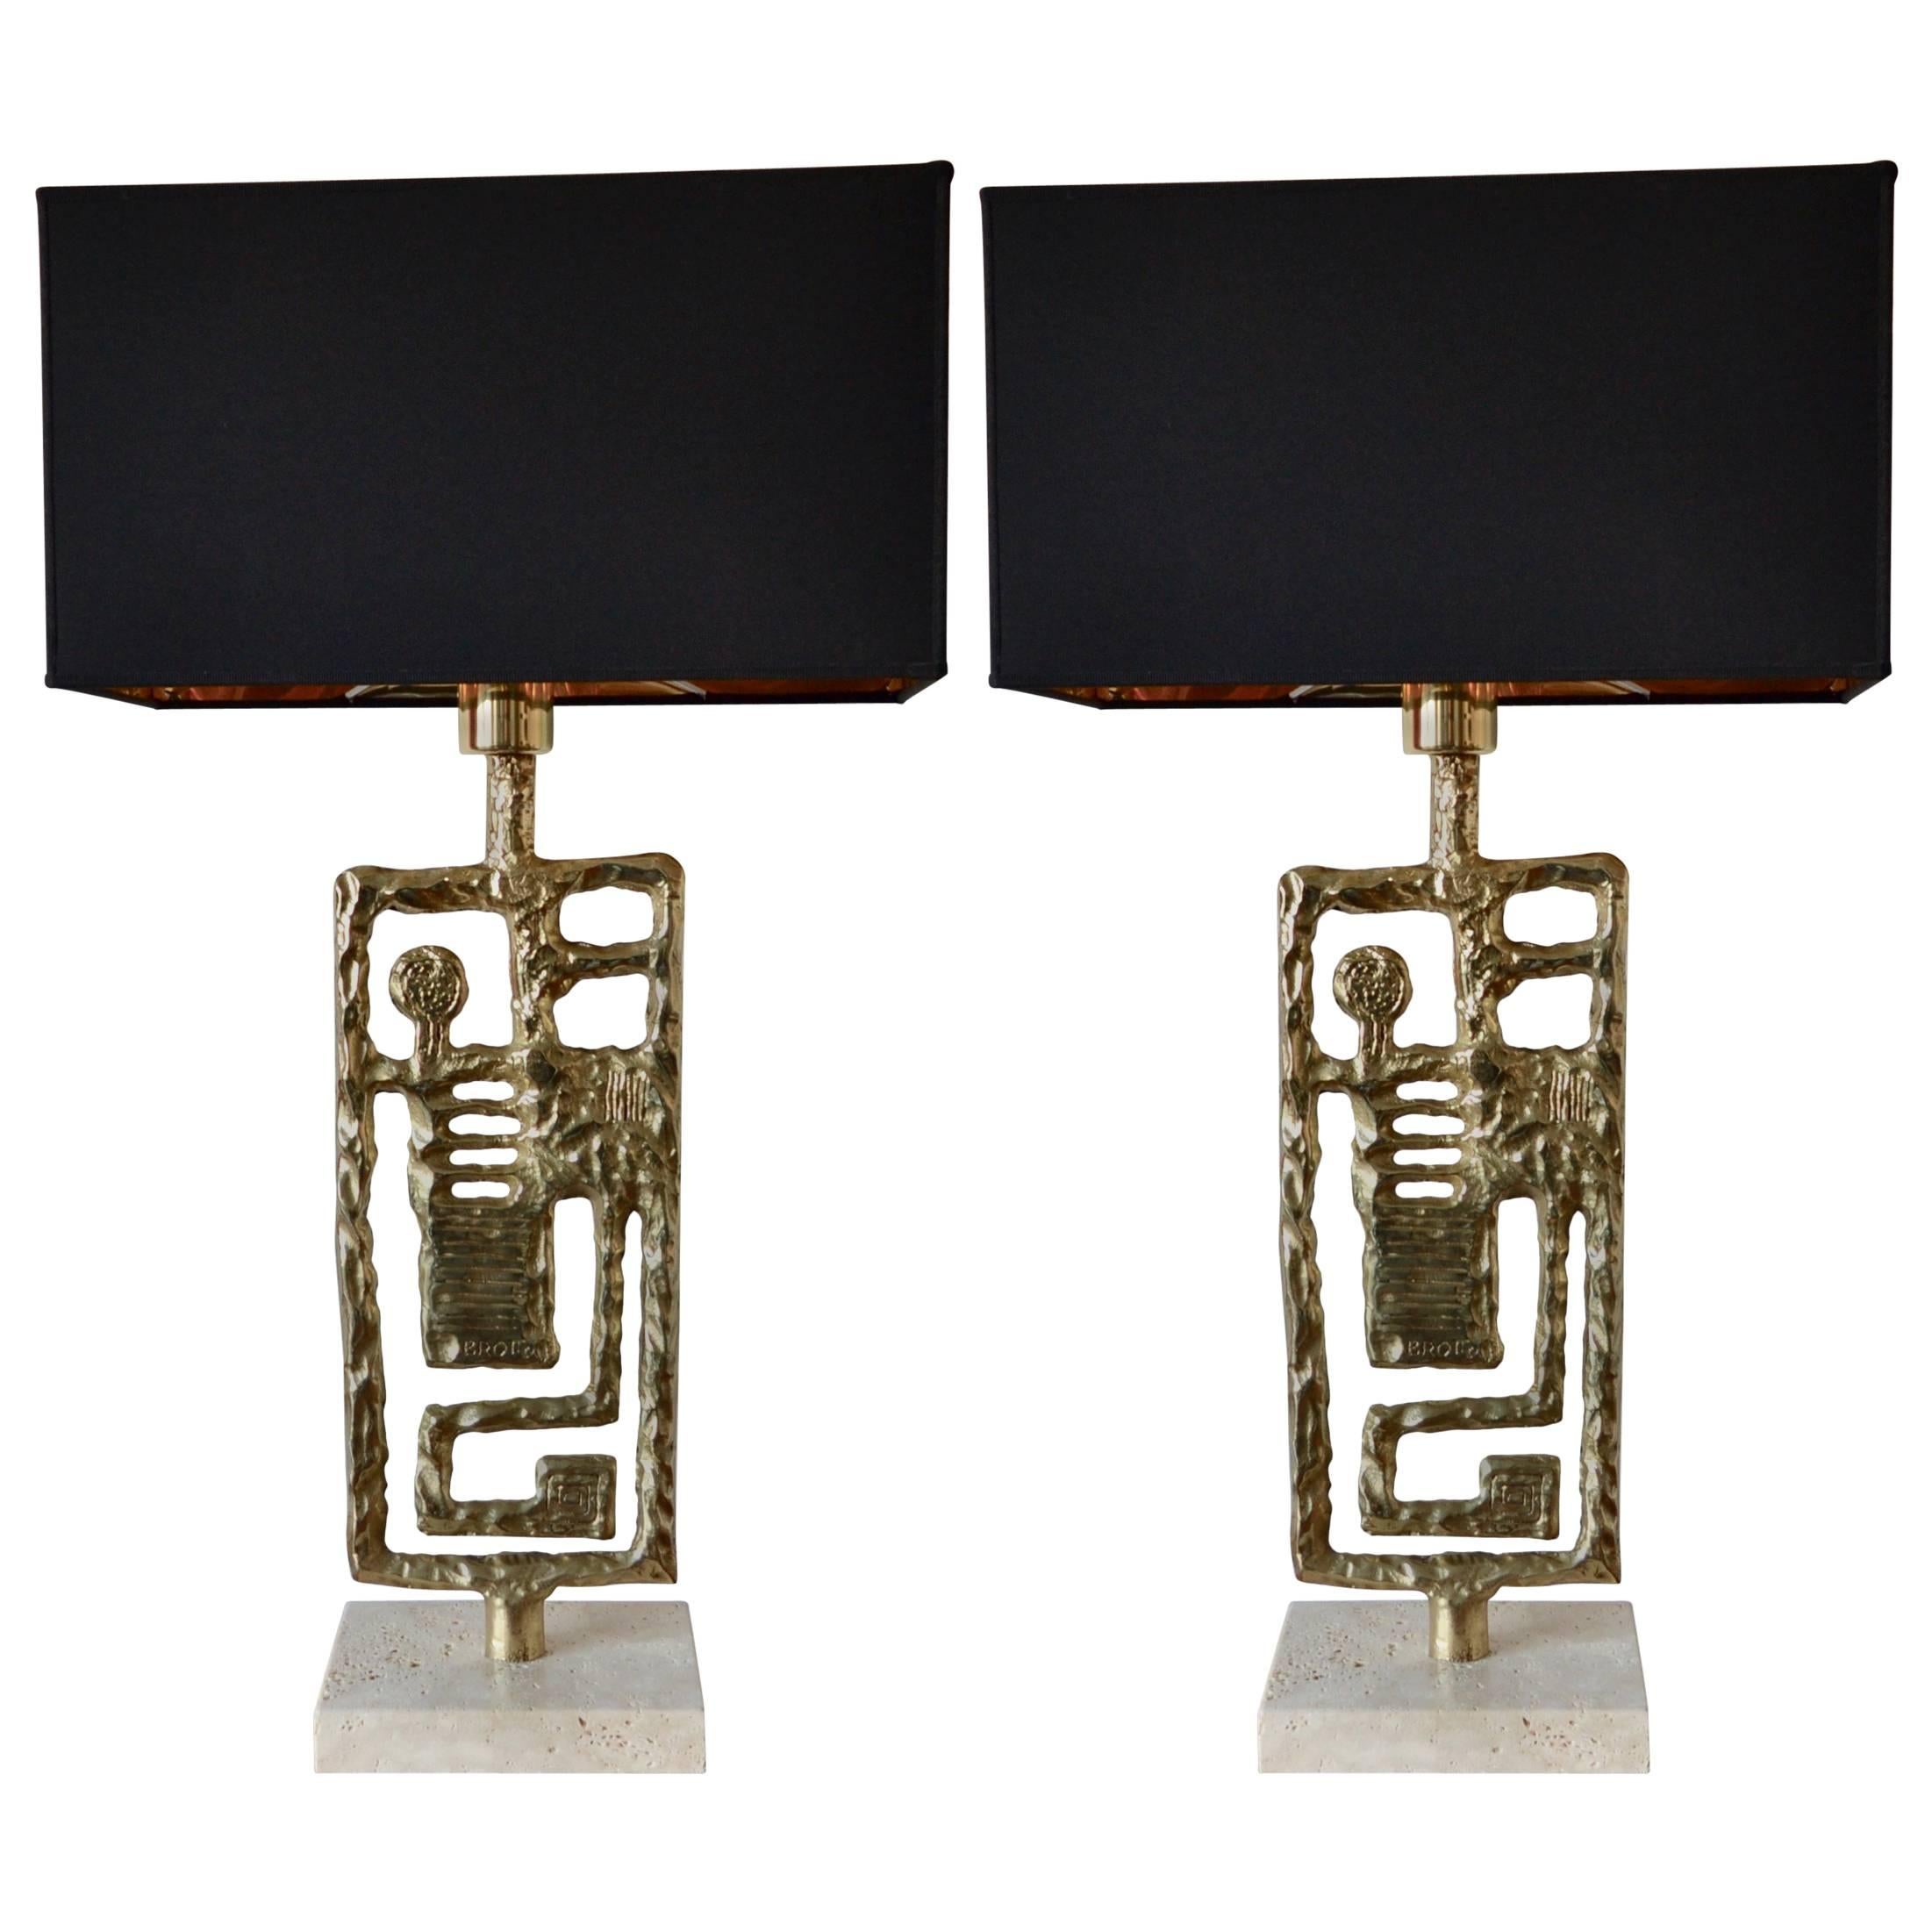 Pair of Table Lamps by Angelo Brotto, Italy, circa 1970